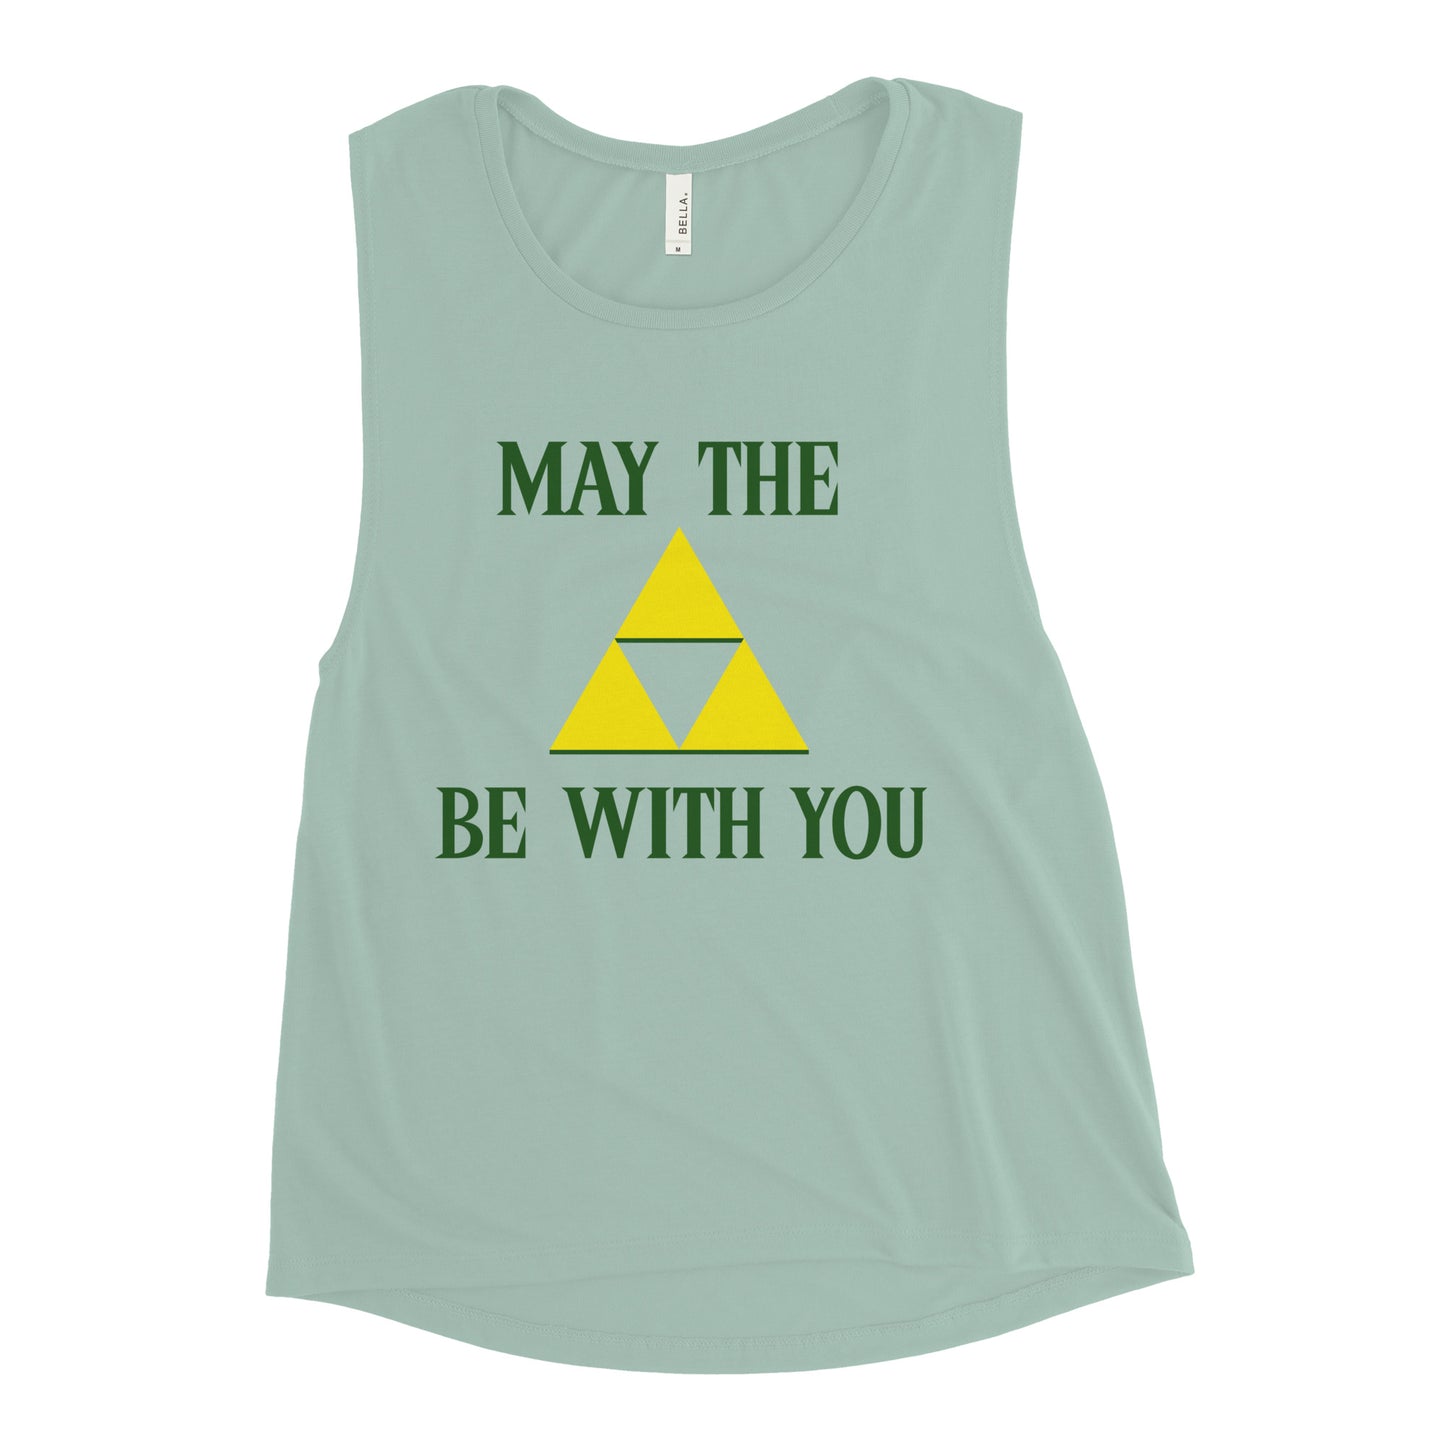 A Link To The Force Women's Muscle Tank